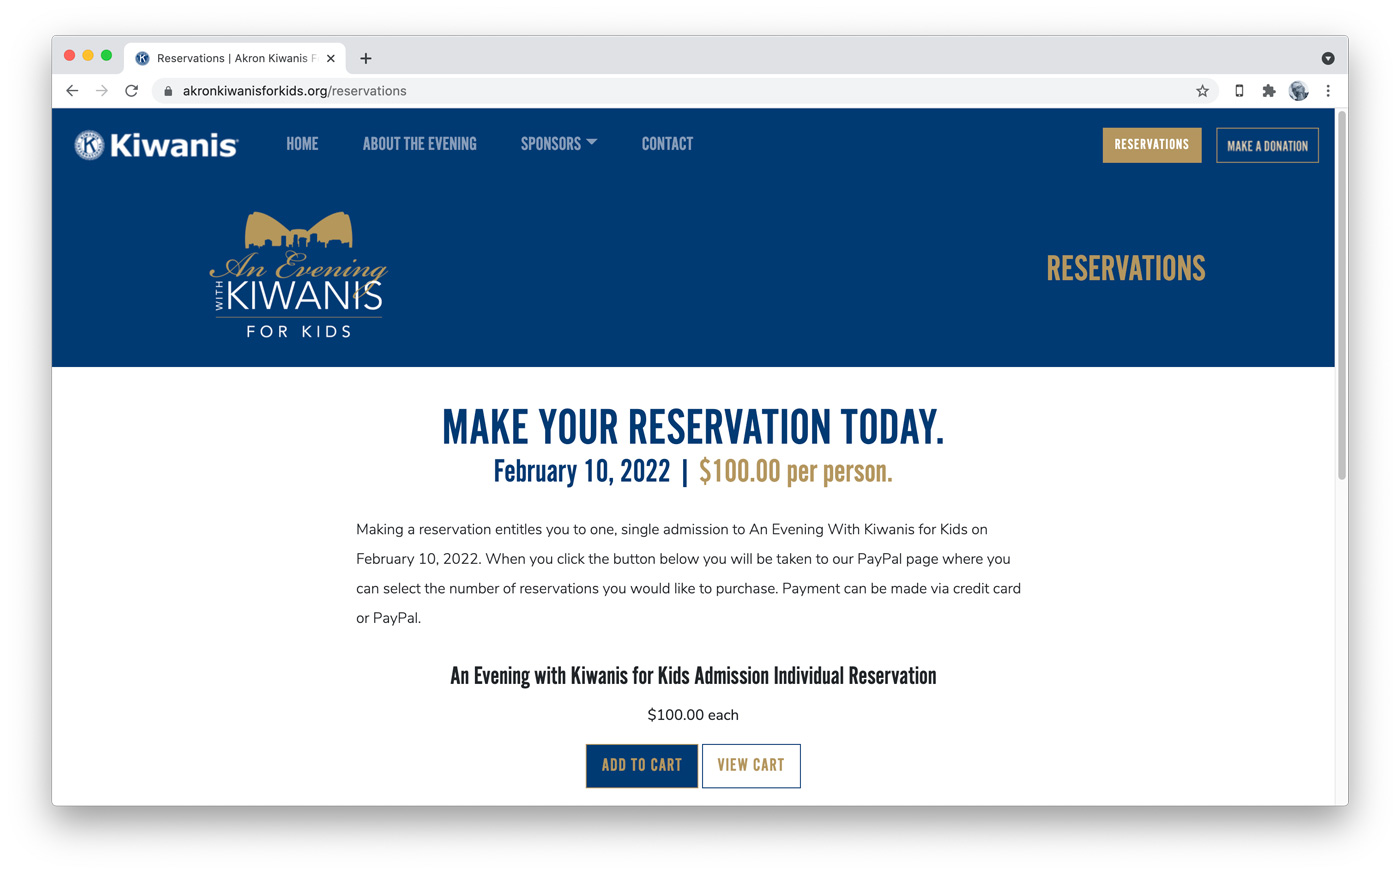 reservations-purchase-an-evening-with-kiwanis.jpg